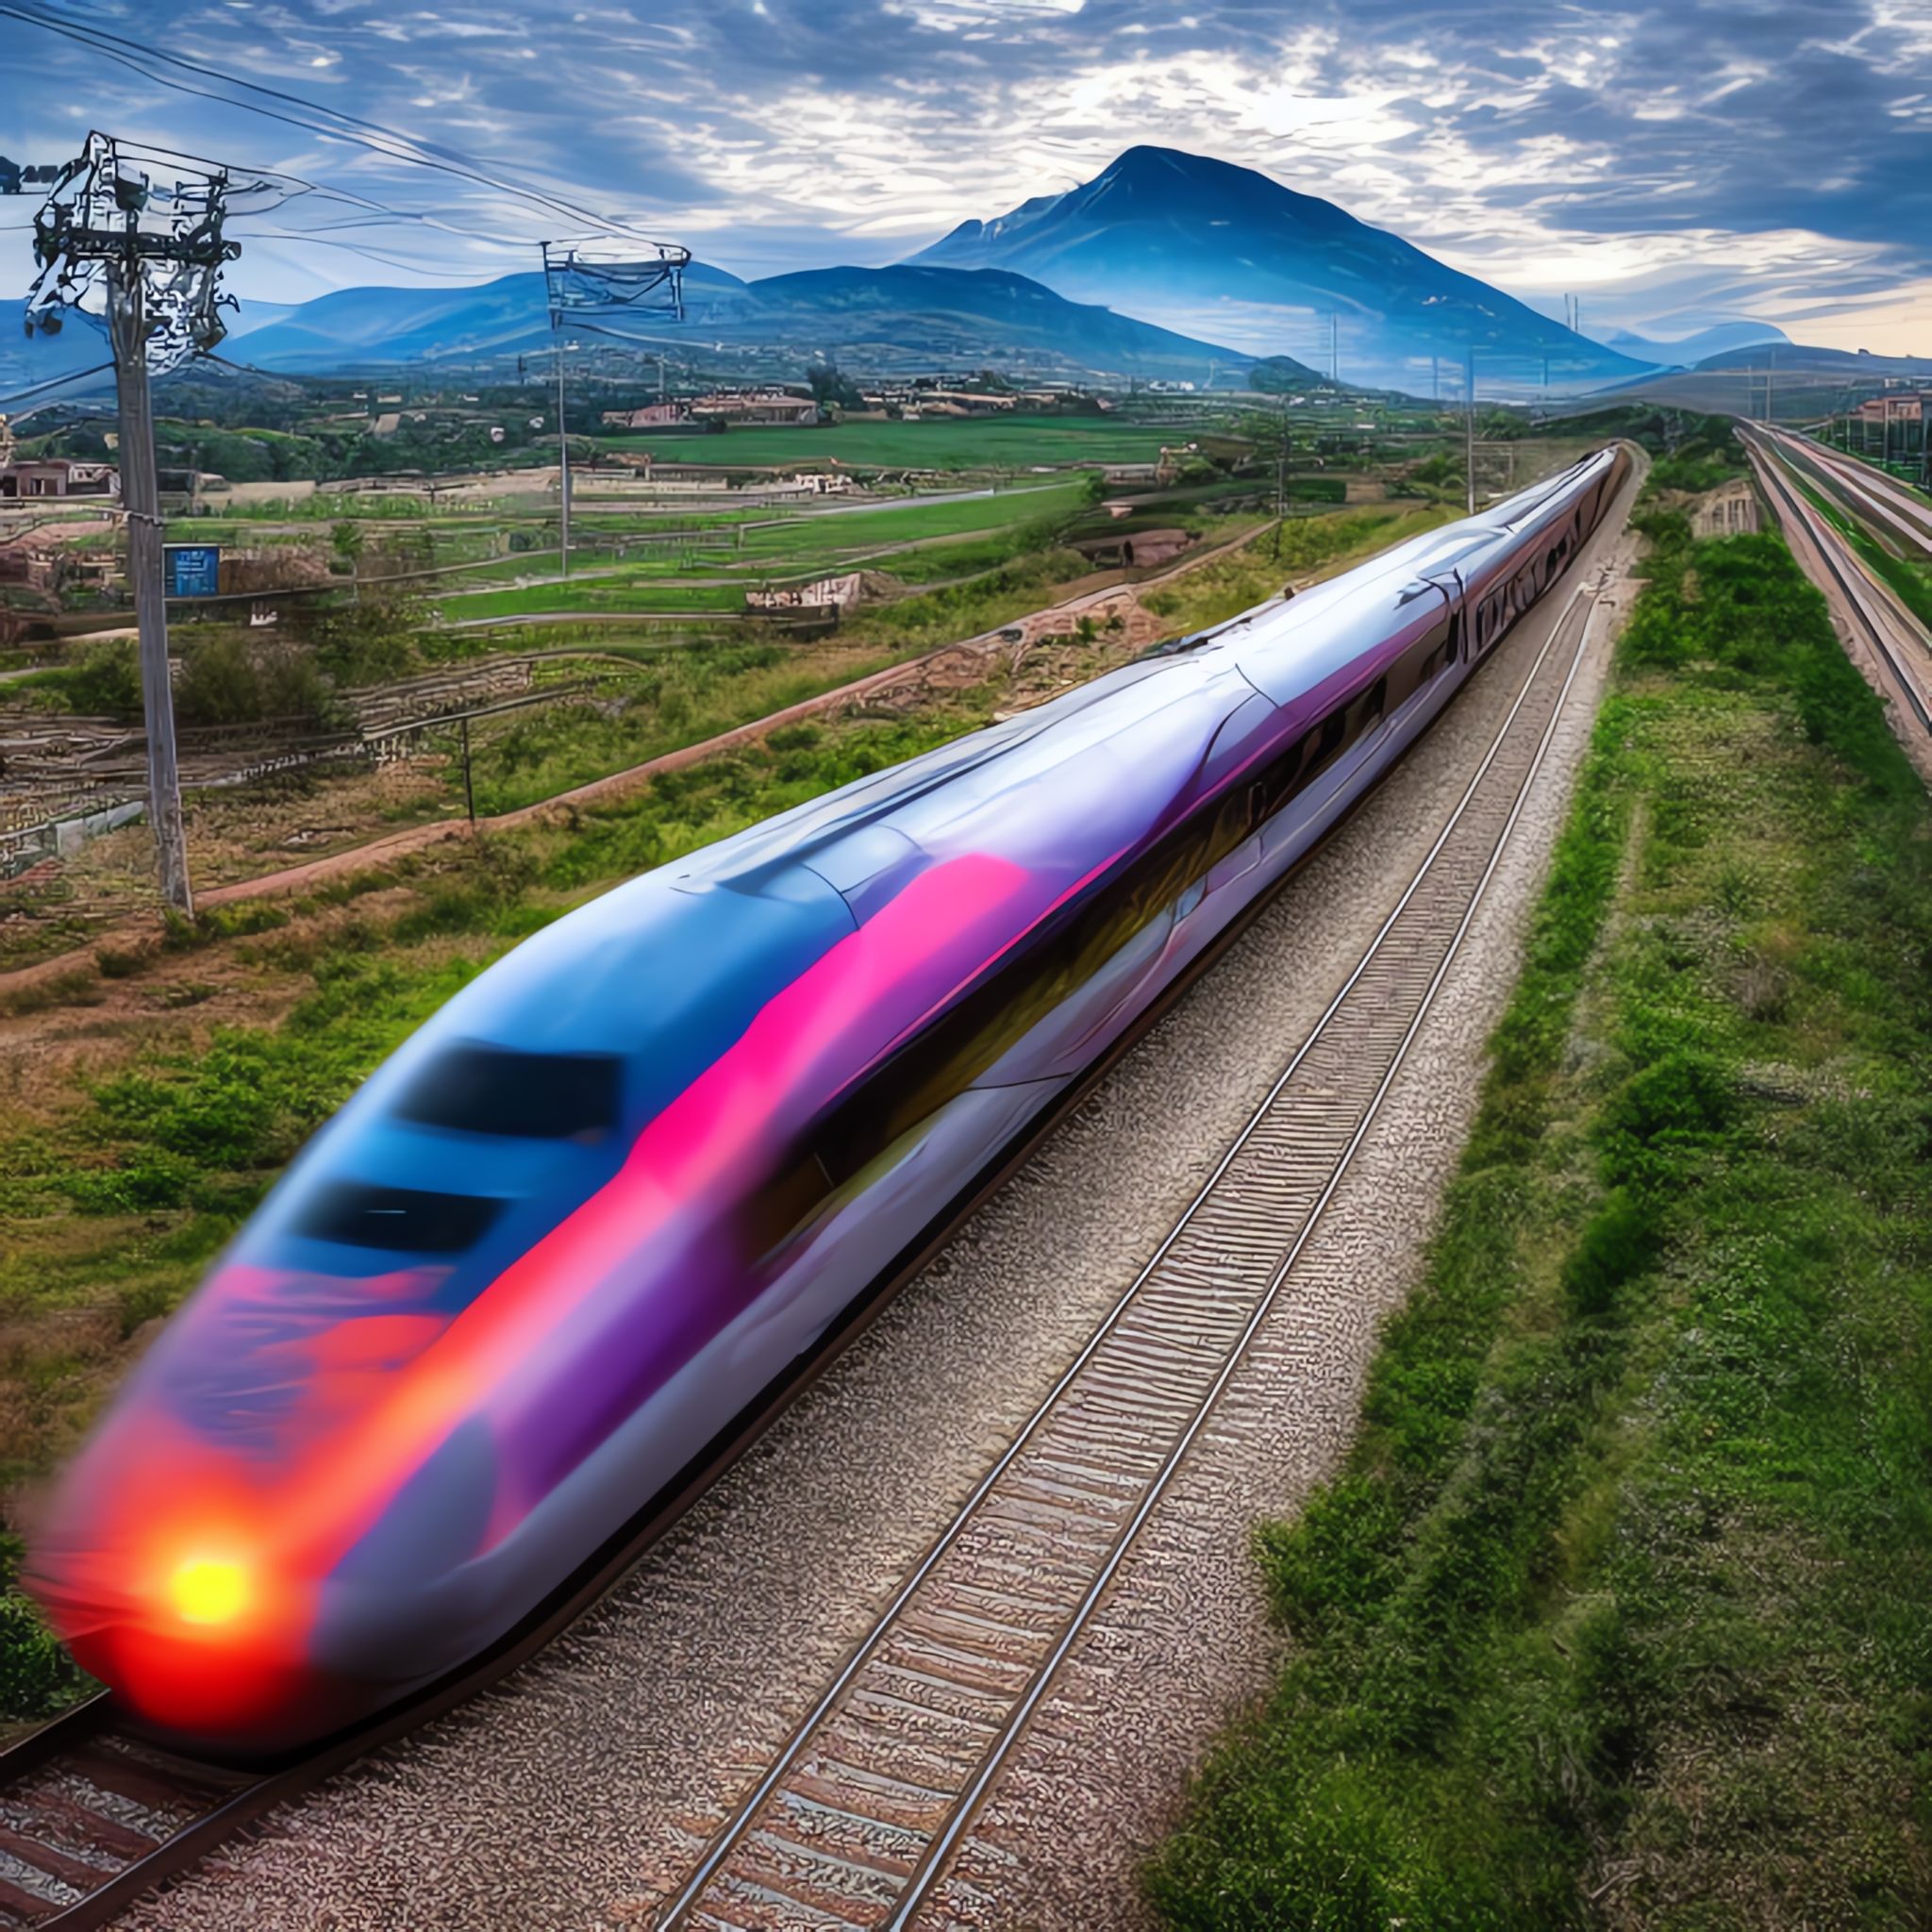 front-high-speed-train-landscape-Italy-realistic-8k-photo-detailed-neon-lights-intense-colors-ref0